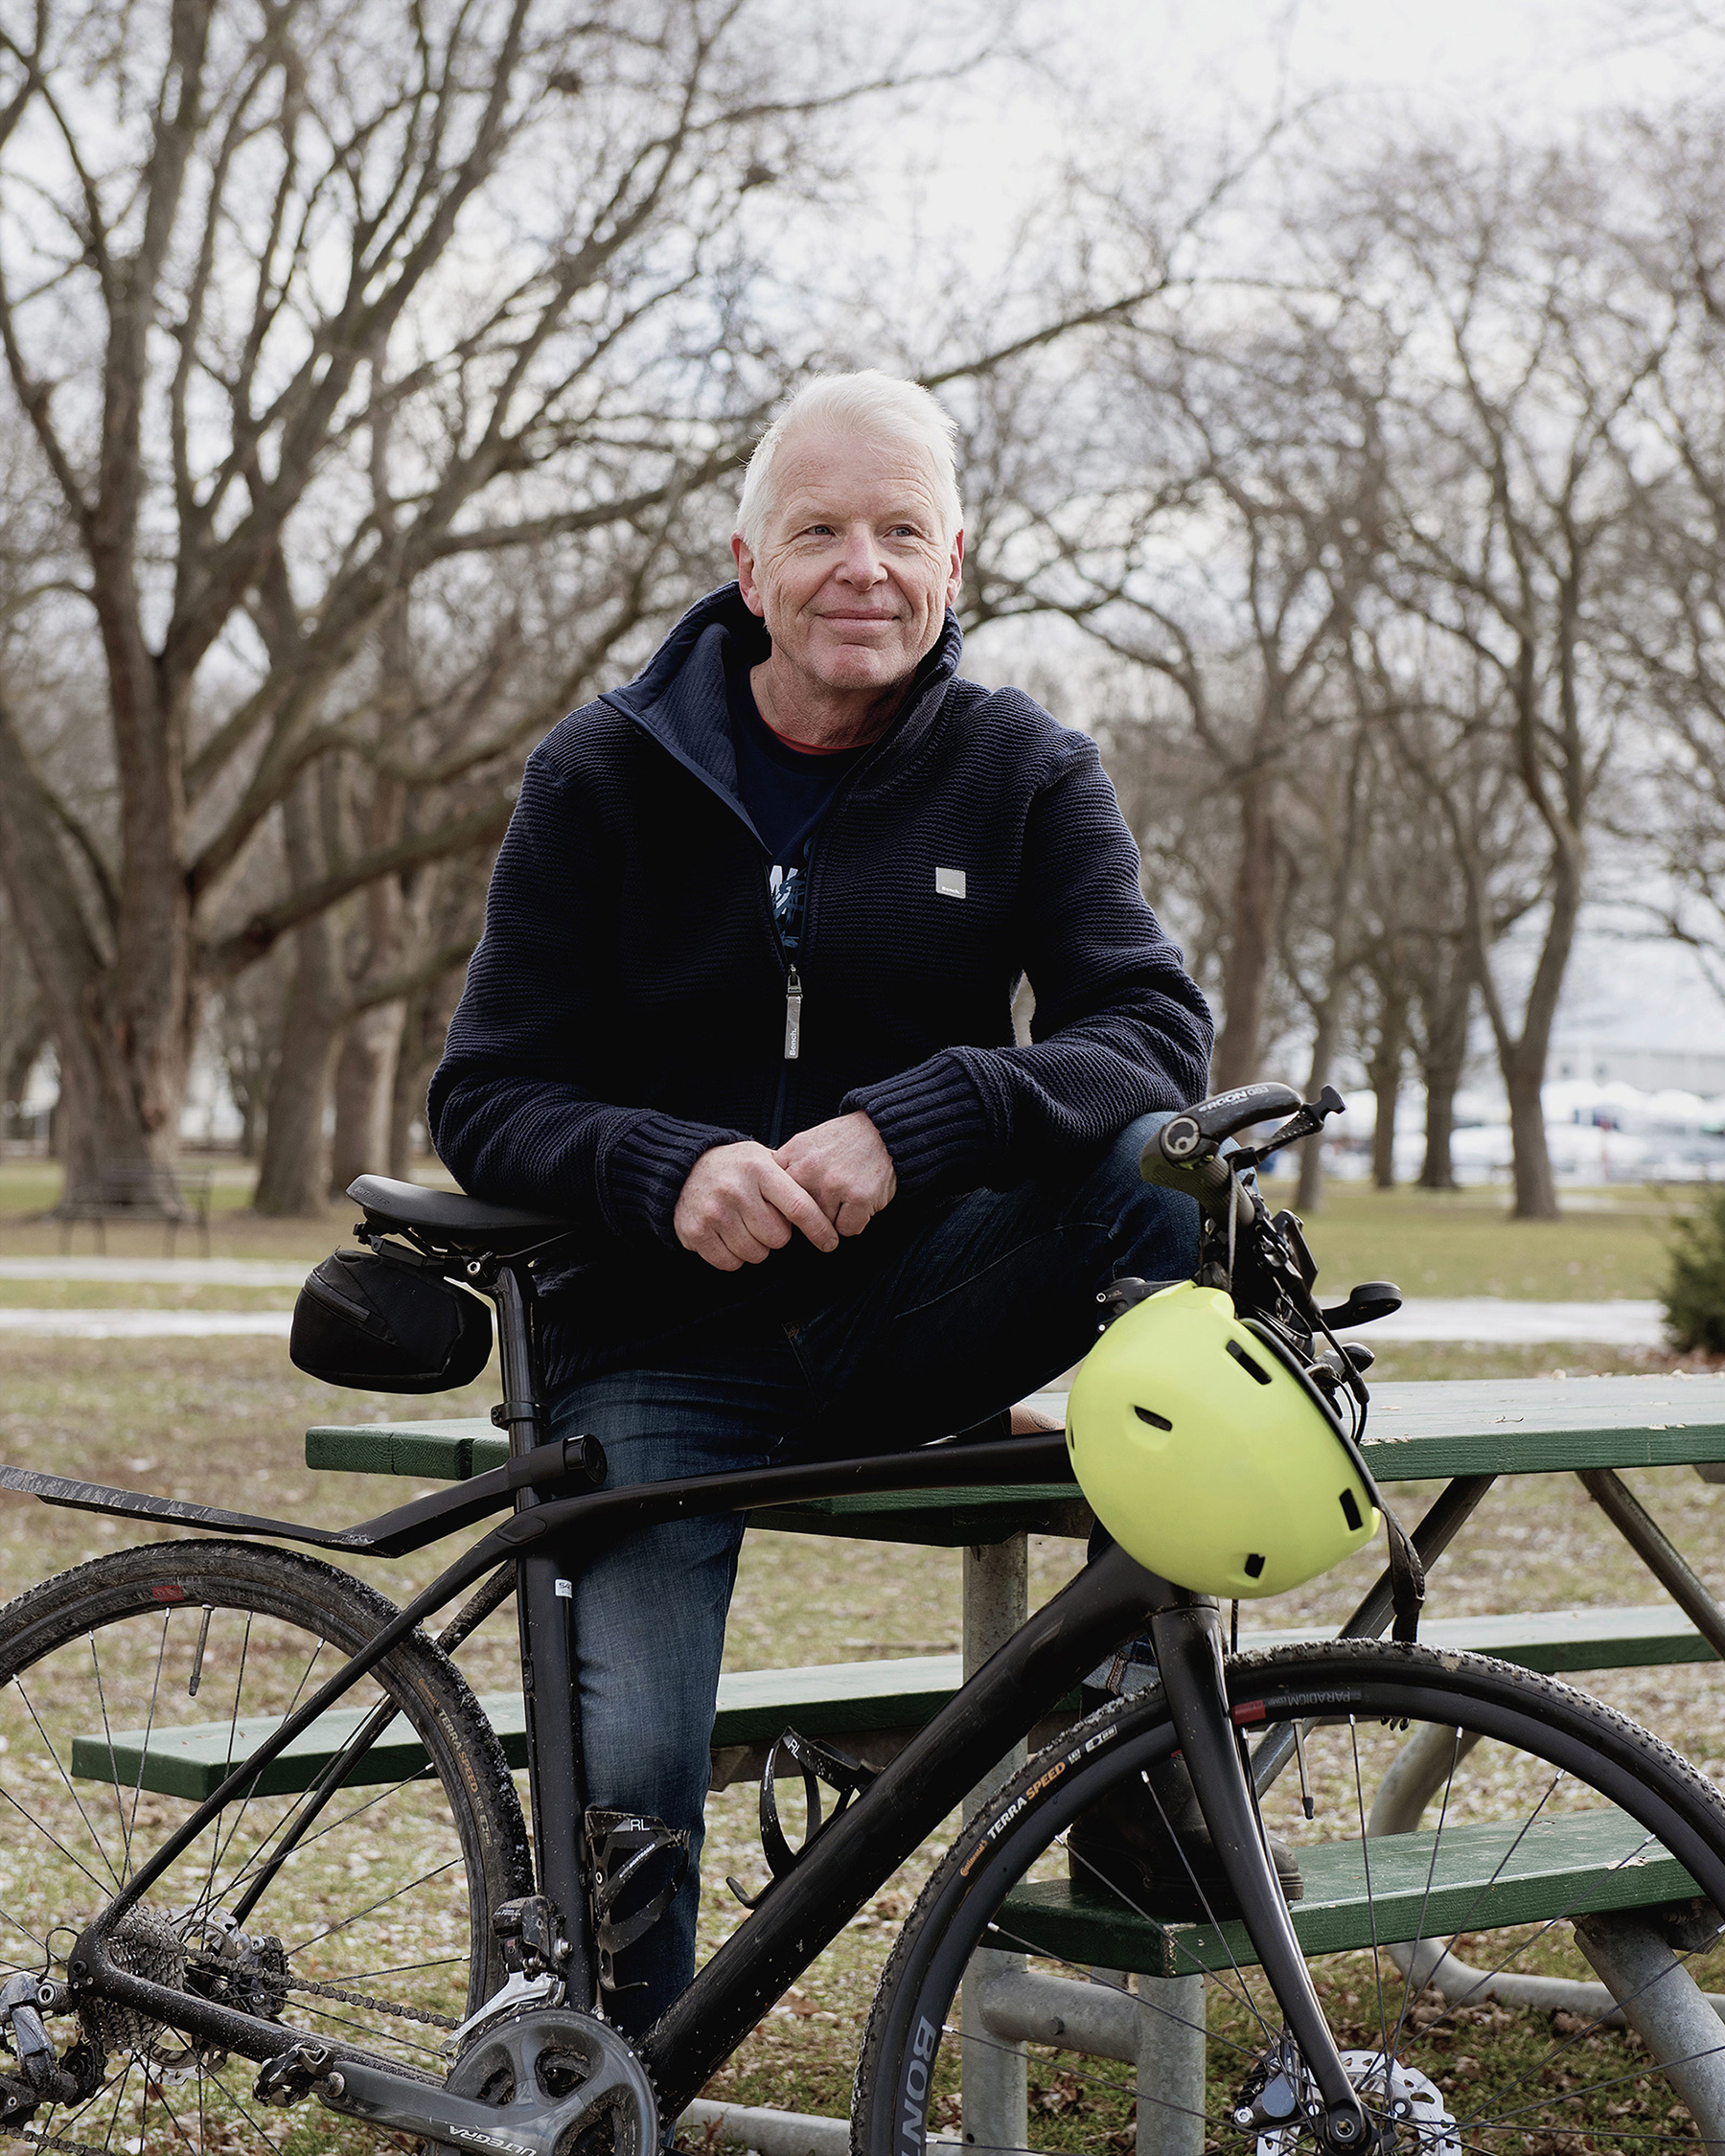 Professor Doug Richards is sitting on the edge a picnic table in a grassy field with trees bare of leaves in the background. His elbows are resting on the seat and handles of a mountain bike.